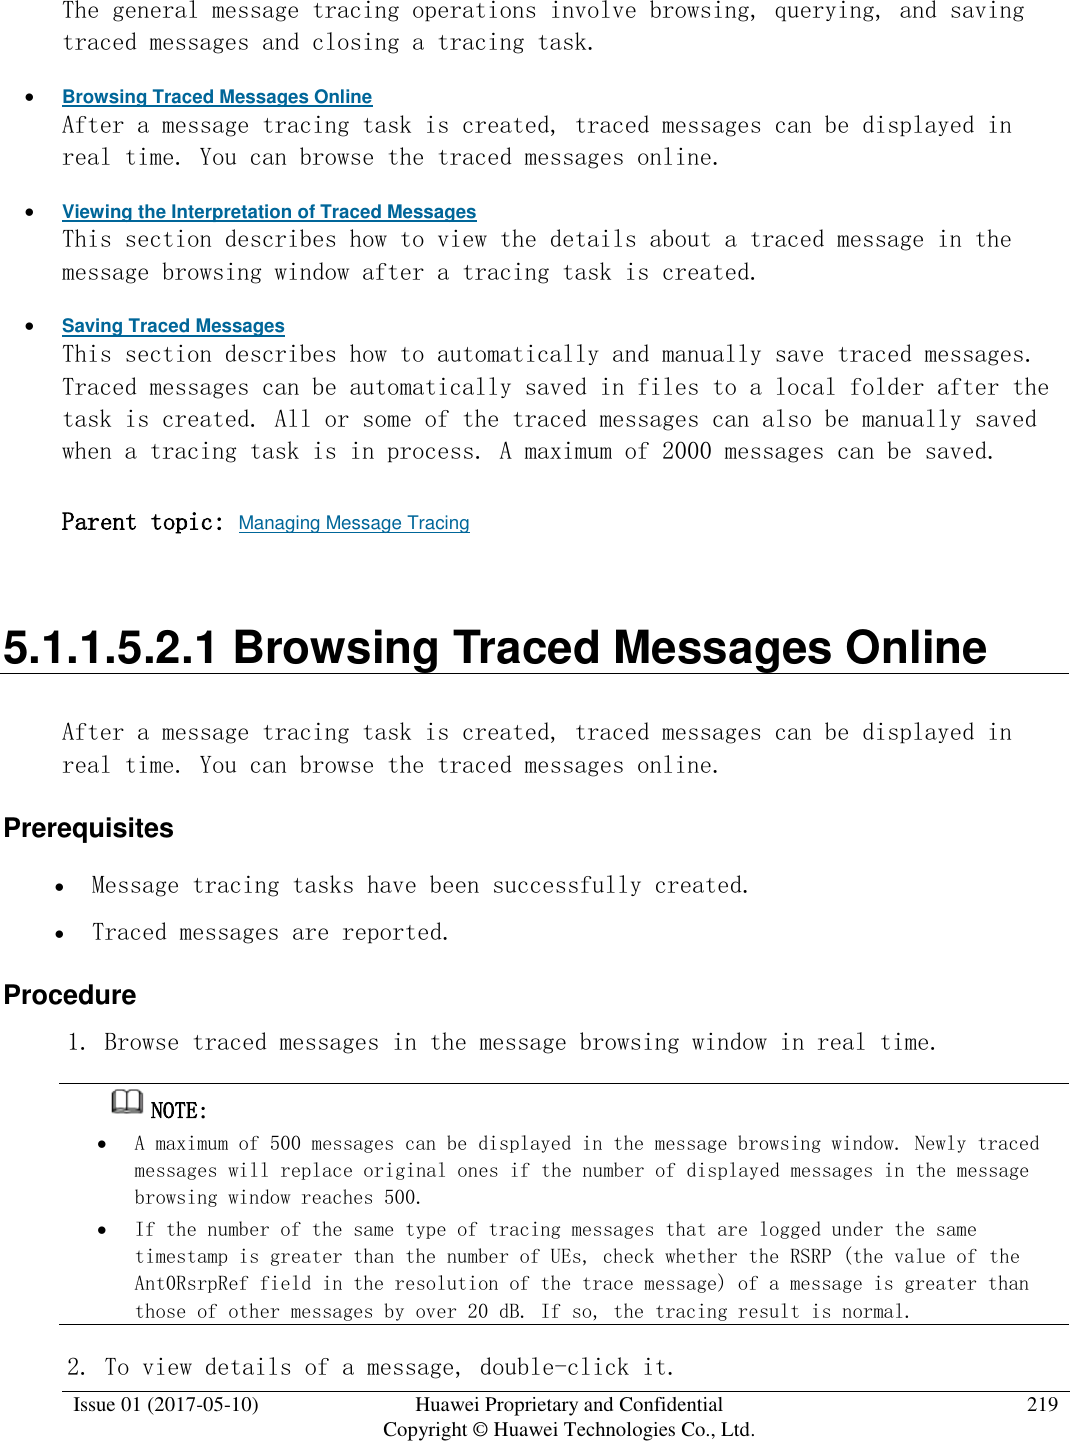  Issue 01 (2017-05-10) Huawei Proprietary and Confidential      Copyright © Huawei Technologies Co., Ltd. 219  The general message tracing operations involve browsing, querying, and saving traced messages and closing a tracing task.   Browsing Traced Messages Online After a message tracing task is created, traced messages can be displayed in real time. You can browse the traced messages online.   Viewing the Interpretation of Traced Messages This section describes how to view the details about a traced message in the message browsing window after a tracing task is created.   Saving Traced Messages This section describes how to automatically and manually save traced messages. Traced messages can be automatically saved in files to a local folder after the task is created. All or some of the traced messages can also be manually saved when a tracing task is in process. A maximum of 2000 messages can be saved.  Parent topic: Managing Message Tracing 5.1.1.5.2.1 Browsing Traced Messages Online After a message tracing task is created, traced messages can be displayed in real time. You can browse the traced messages online.  Prerequisites  Message tracing tasks have been successfully created.  Traced messages are reported. Procedure 1. Browse traced messages in the message browsing window in real time.  NOTE:   A maximum of 500 messages can be displayed in the message browsing window. Newly traced messages will replace original ones if the number of displayed messages in the message browsing window reaches 500.   If the number of the same type of tracing messages that are logged under the same timestamp is greater than the number of UEs, check whether the RSRP (the value of the Ant0RsrpRef field in the resolution of the trace message) of a message is greater than those of other messages by over 20 dB. If so, the tracing result is normal. 2. To view details of a message, double-click it.  